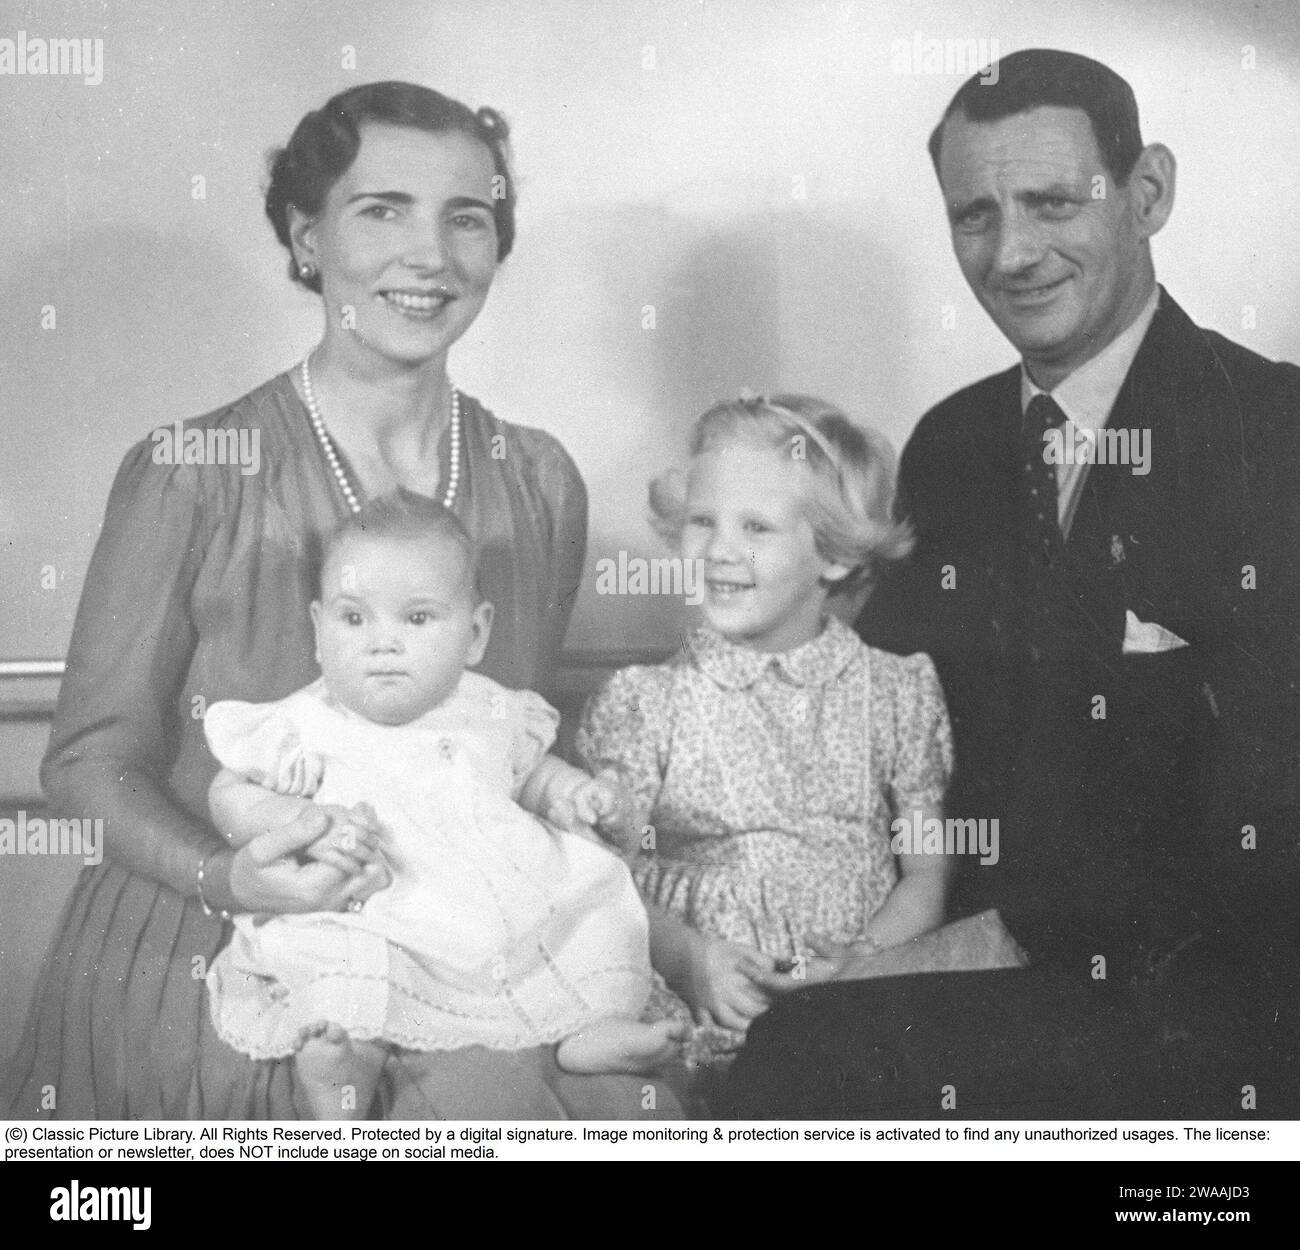 Queen Margrethe II of Denmark.  Pictured with her mother and father, Ingrid of Sweden and king Frederick IX of Denmark. Princess Benedikte in her mothers knee. 1944 Stock Photo